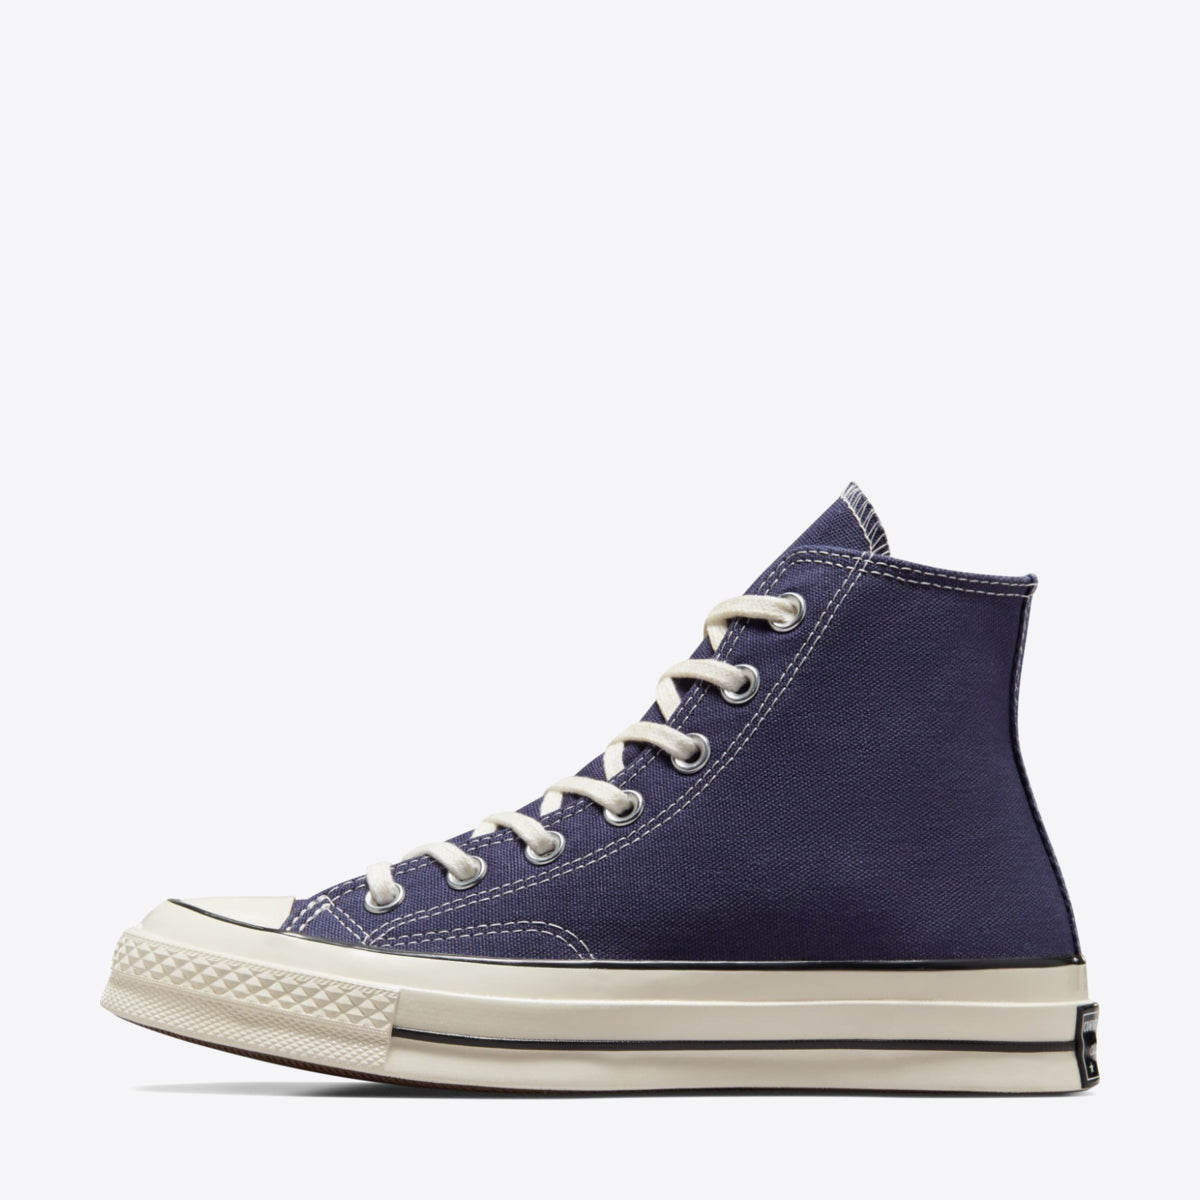 CONVERSE Chuck Taylor 70 Seasonal High Uncharted Waters/Egret - Image 3